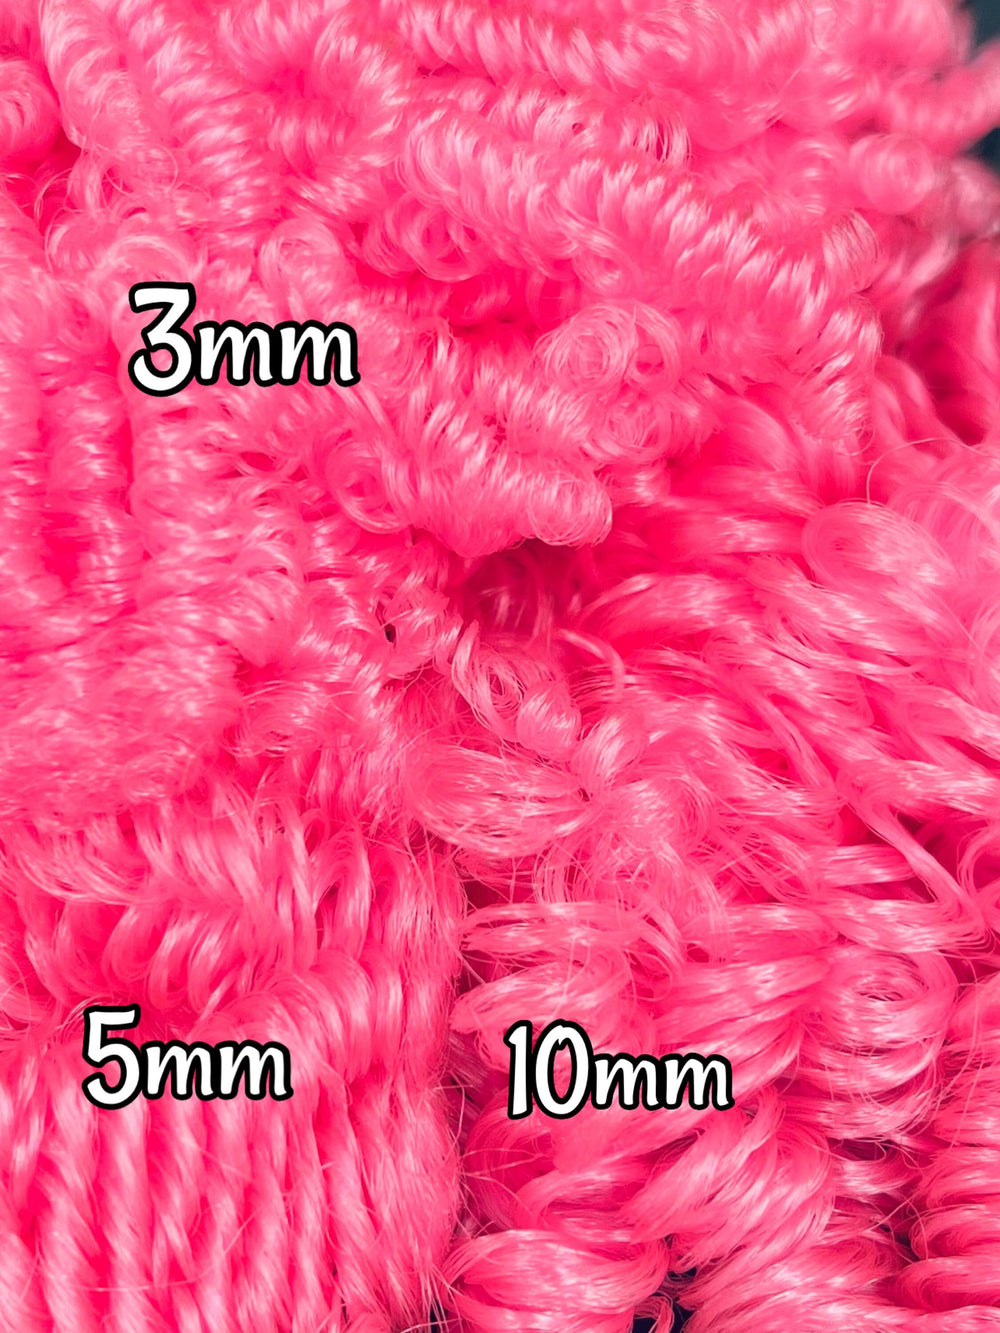 DG Curly Cupid NH3122 pink 36 inch 0.5oz/14g pre-curled Nylon Doll Hair for rerooting fashion dolls Standard Temperature